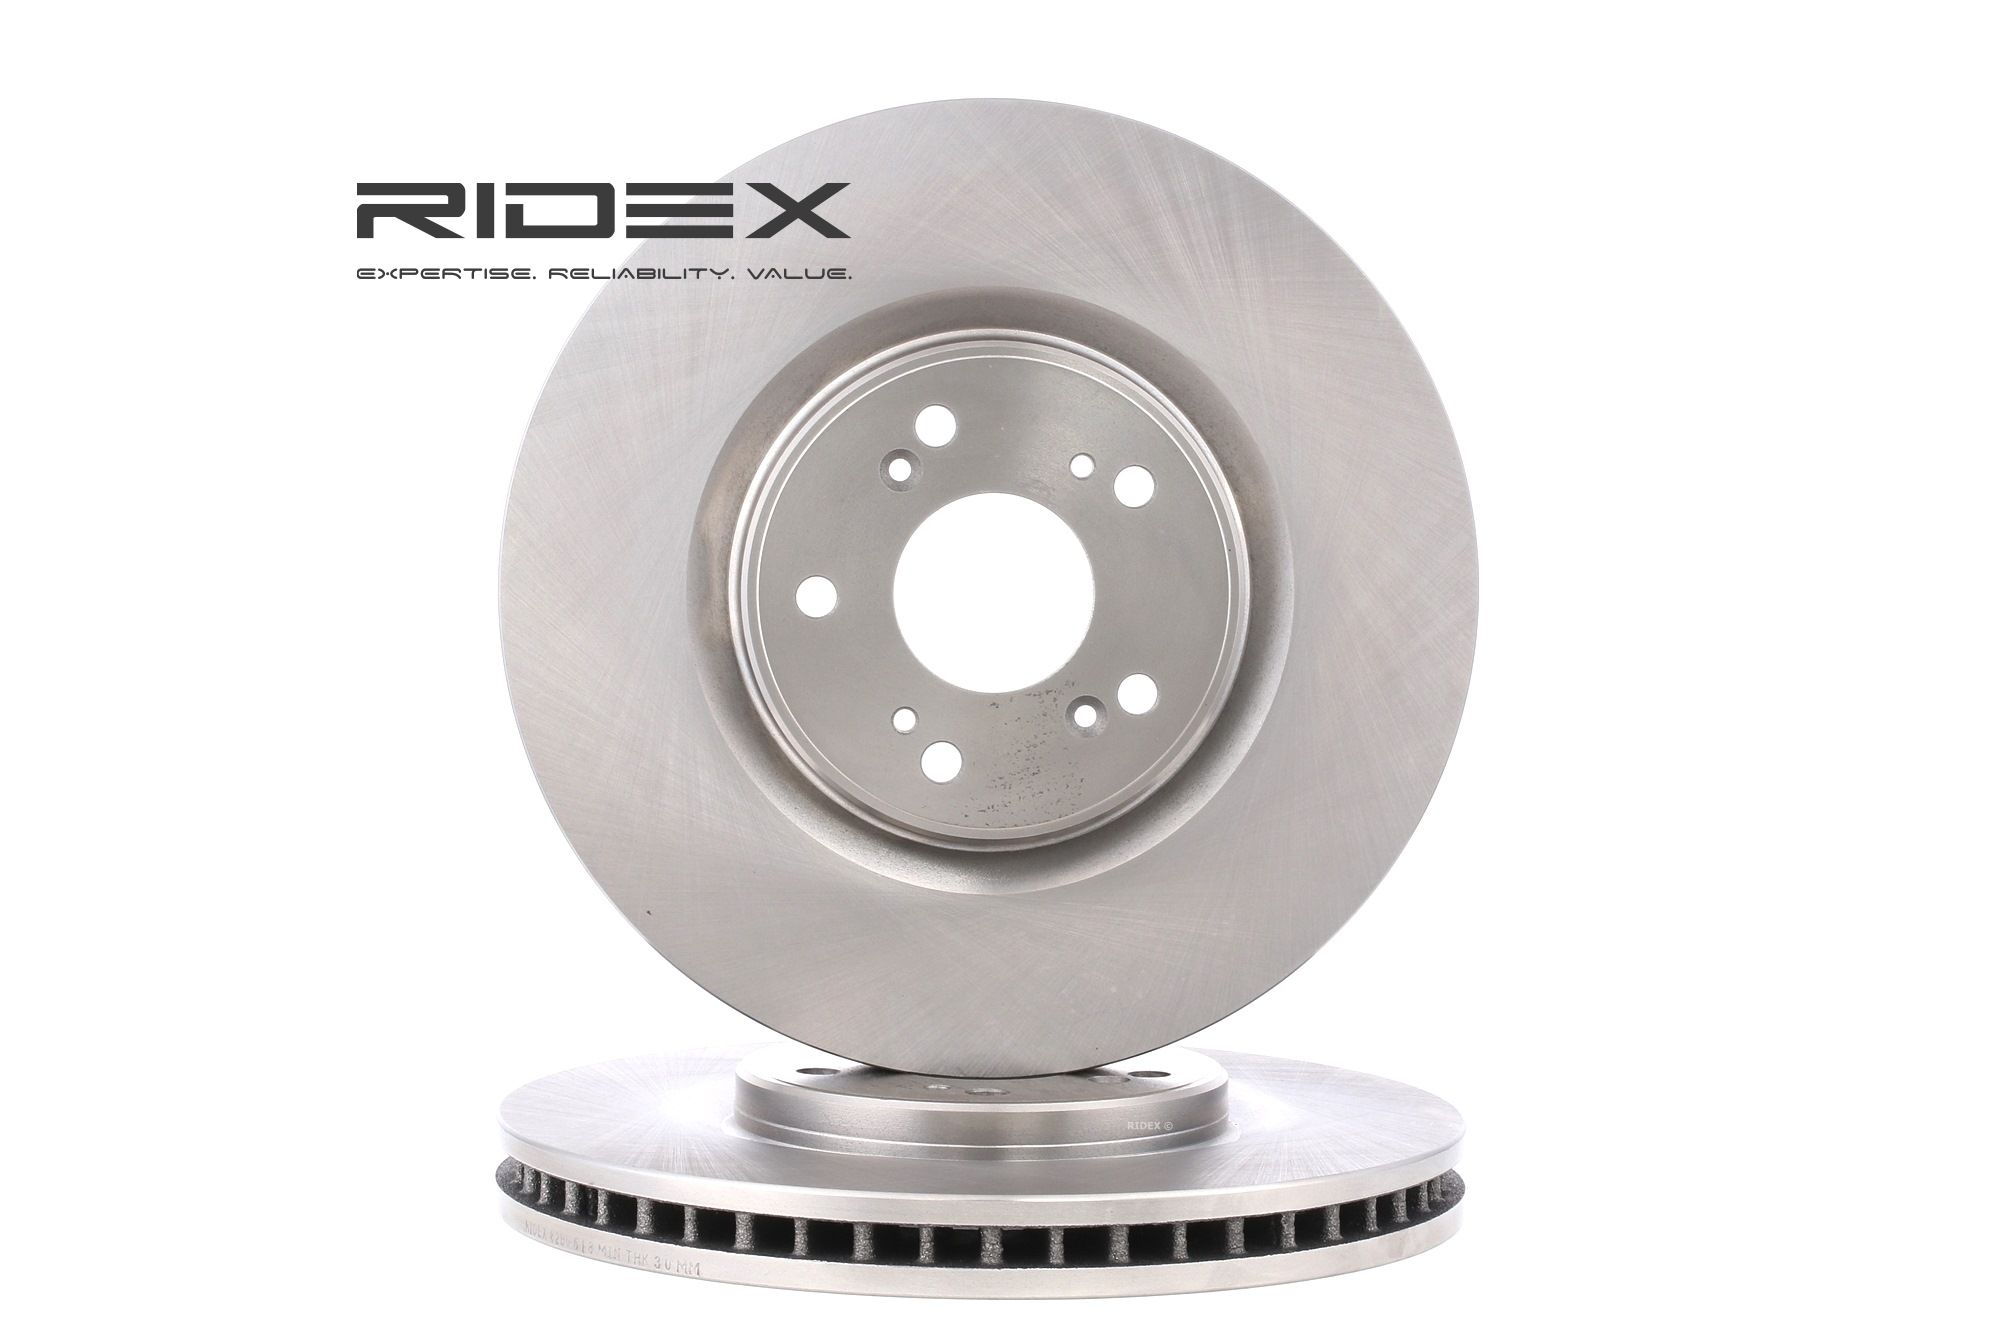 RIDEX 82B0618 Brake disc Front Axle, 320,0x32,0mm, 5x114,3, Vented, Uncoated